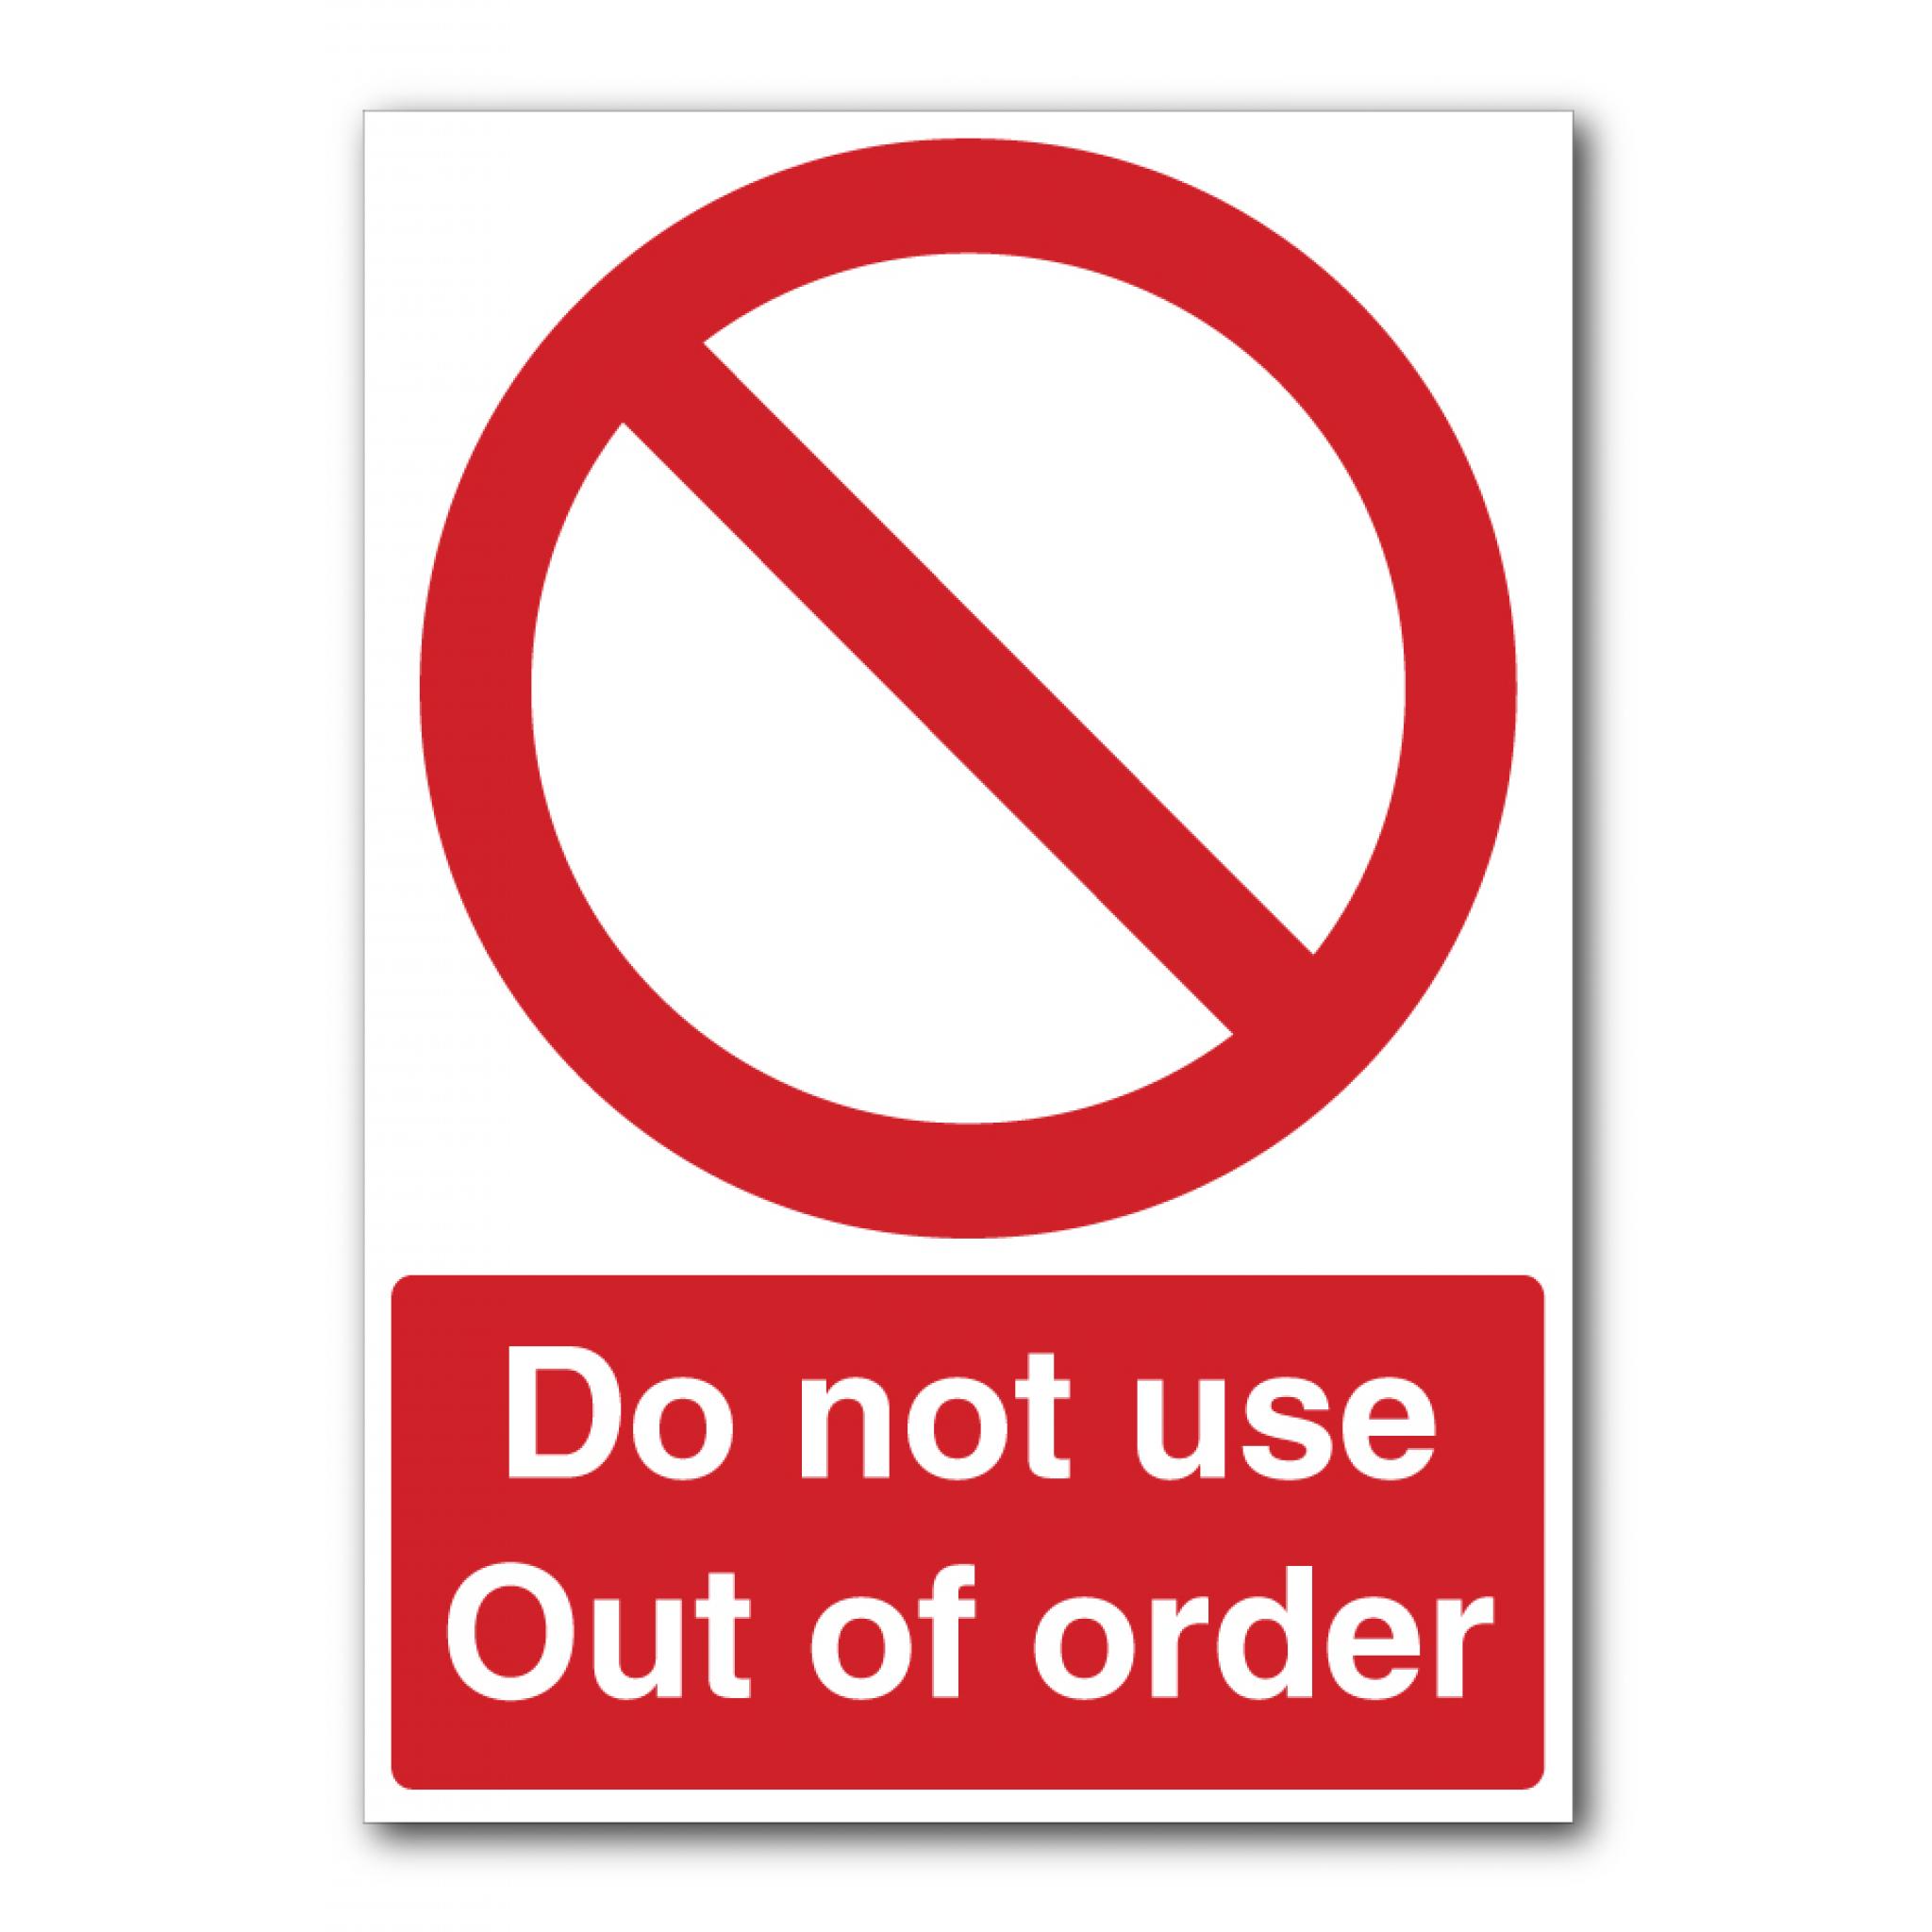 Do Not Use Sign Printable